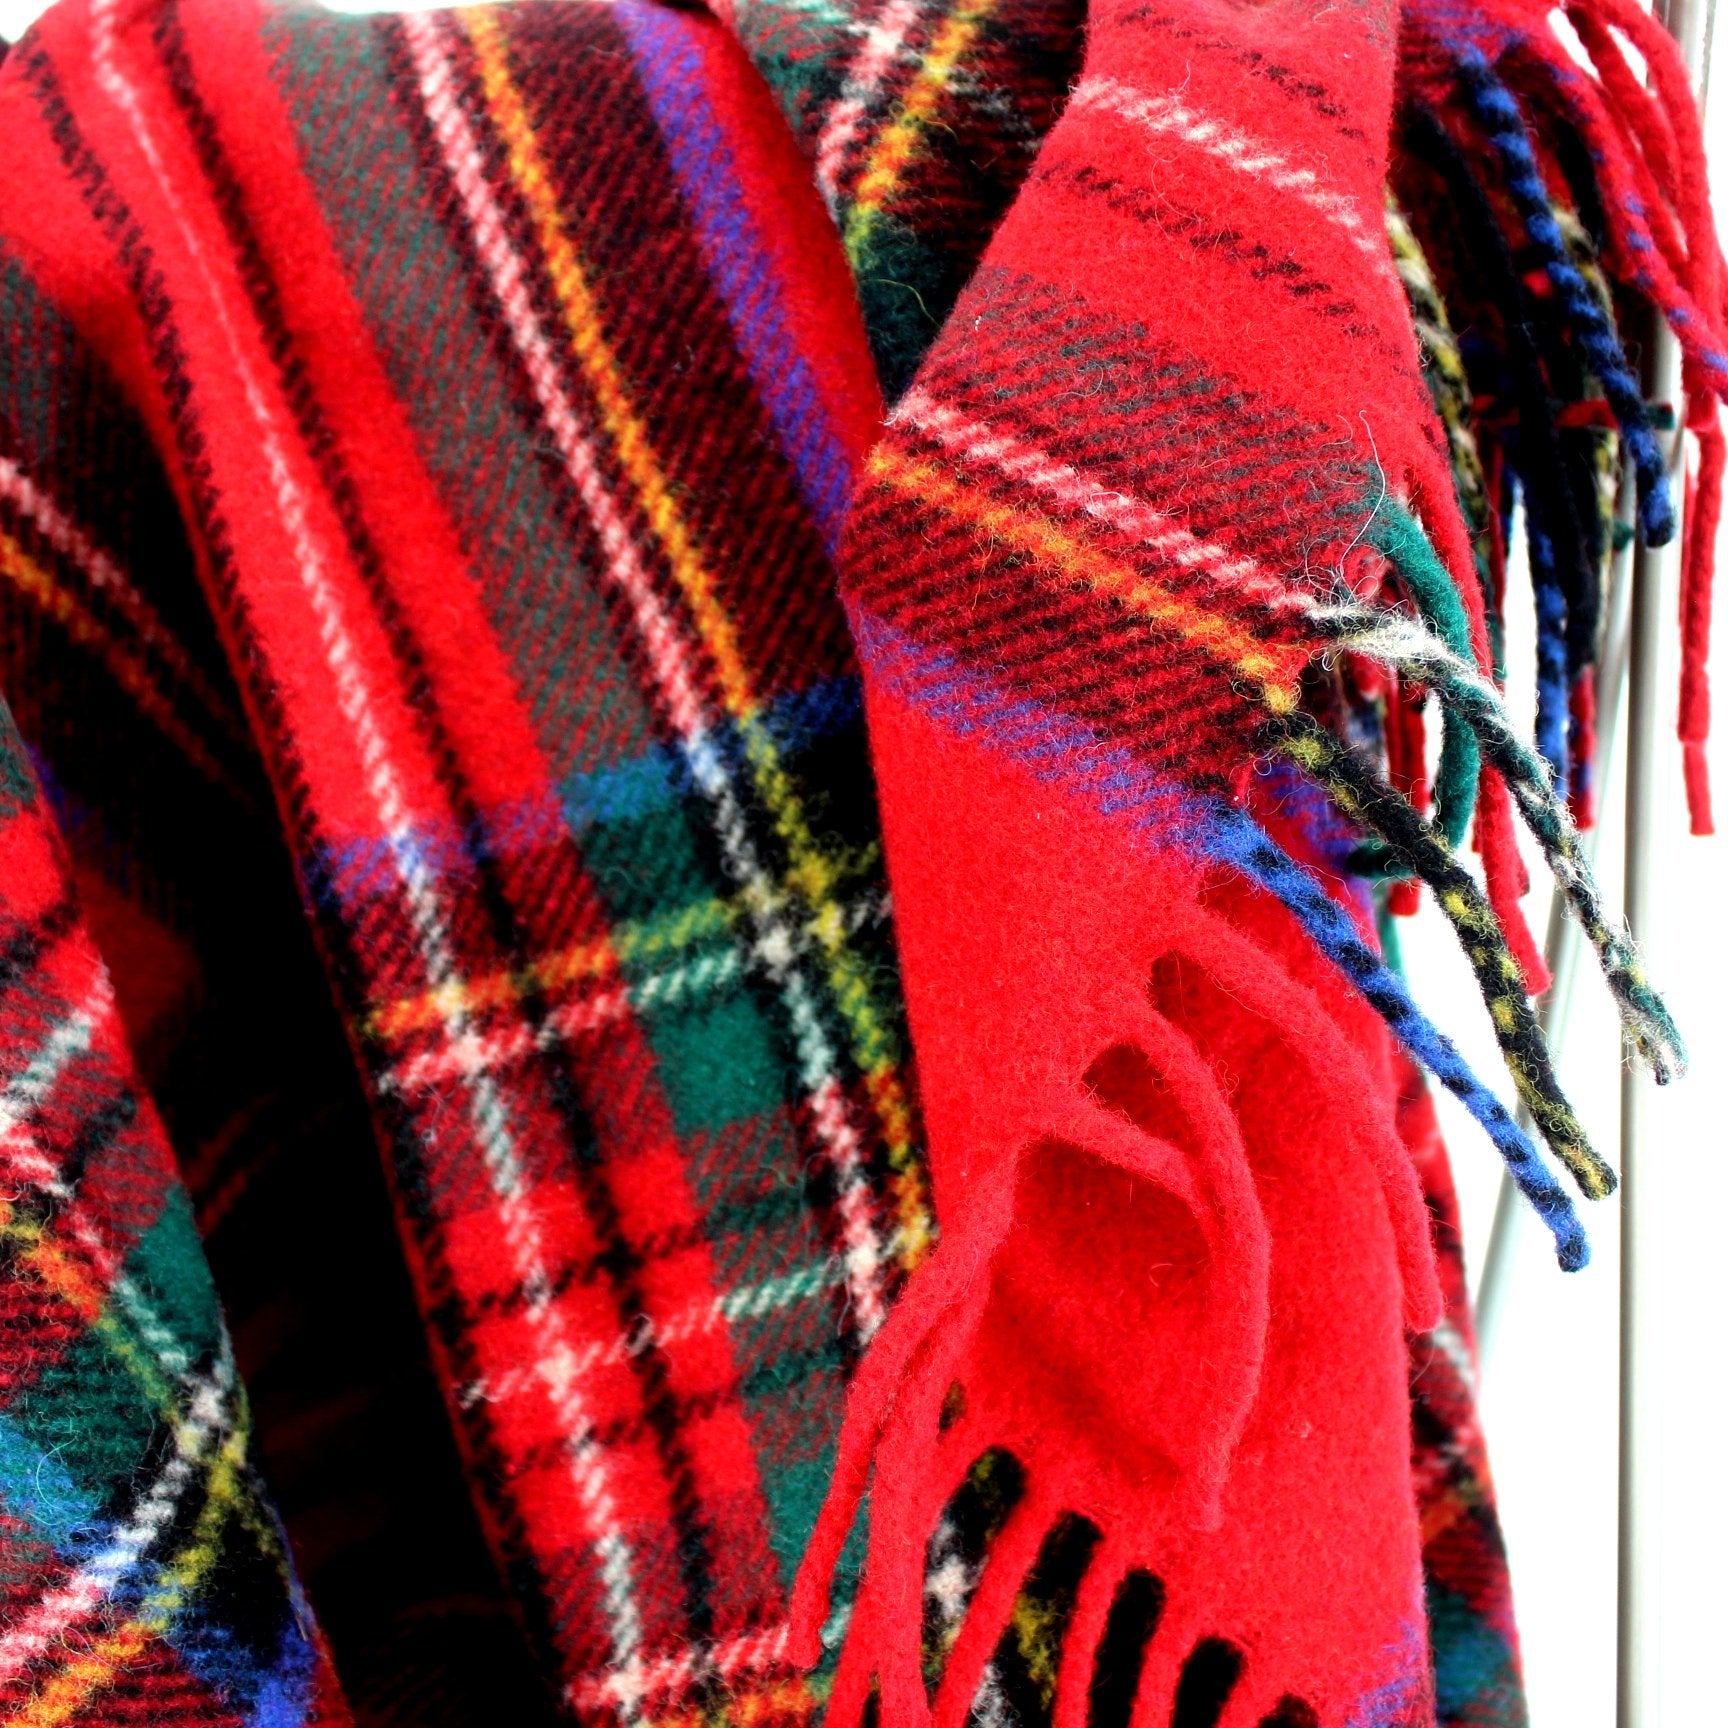 Classic Wool Throw Blanket Red Plaid Made Romania Heavy Dense close view fabric